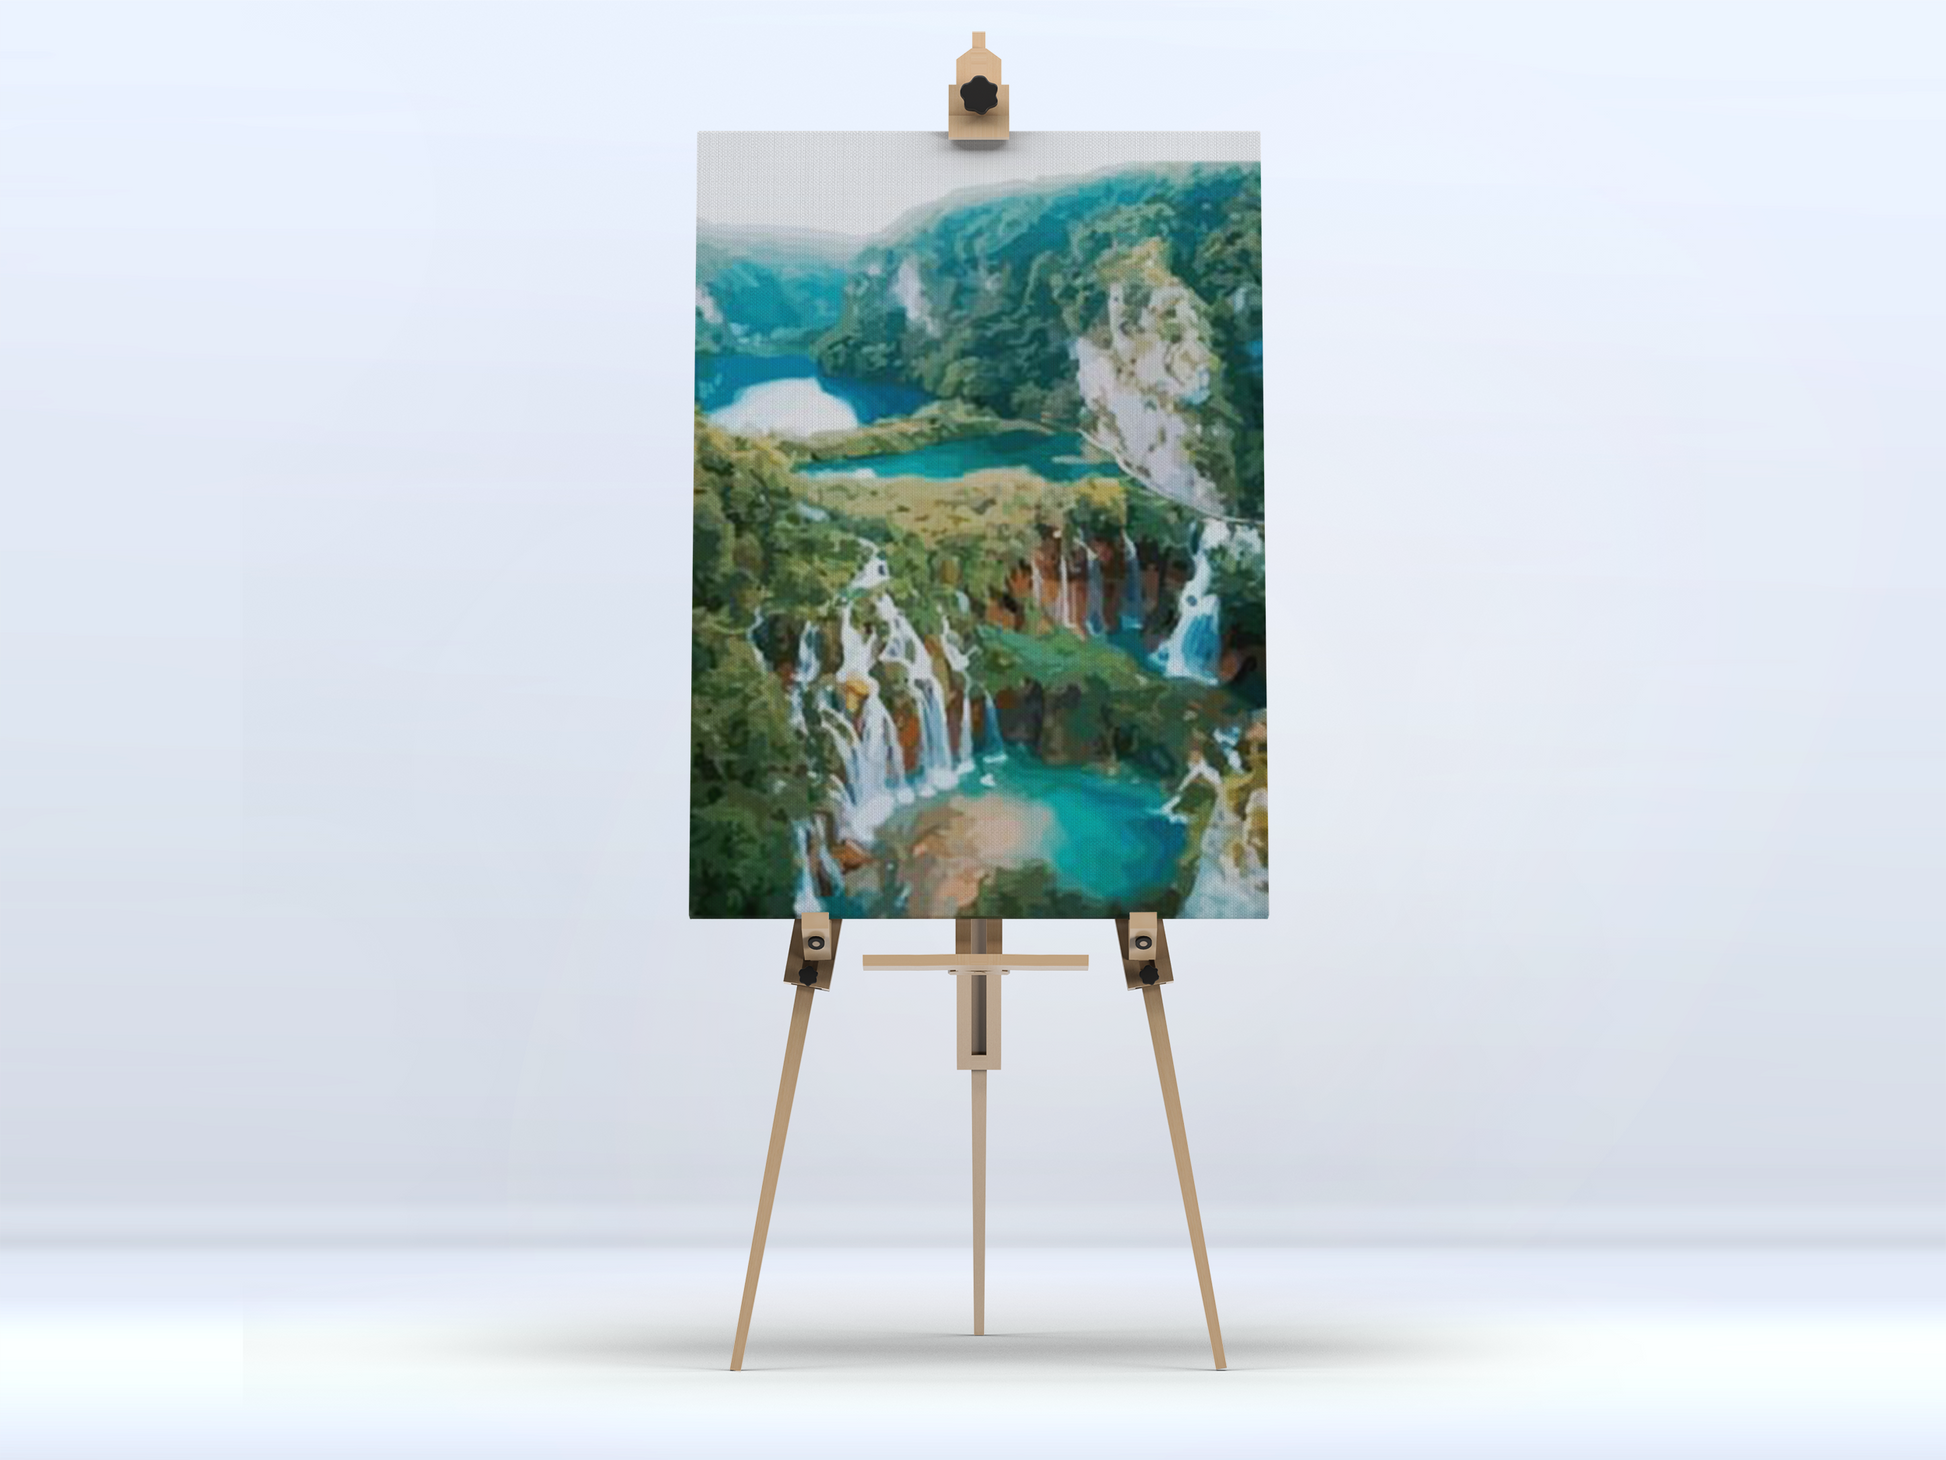 Croatia Waterfall Paint by Numbers Kit on Easel